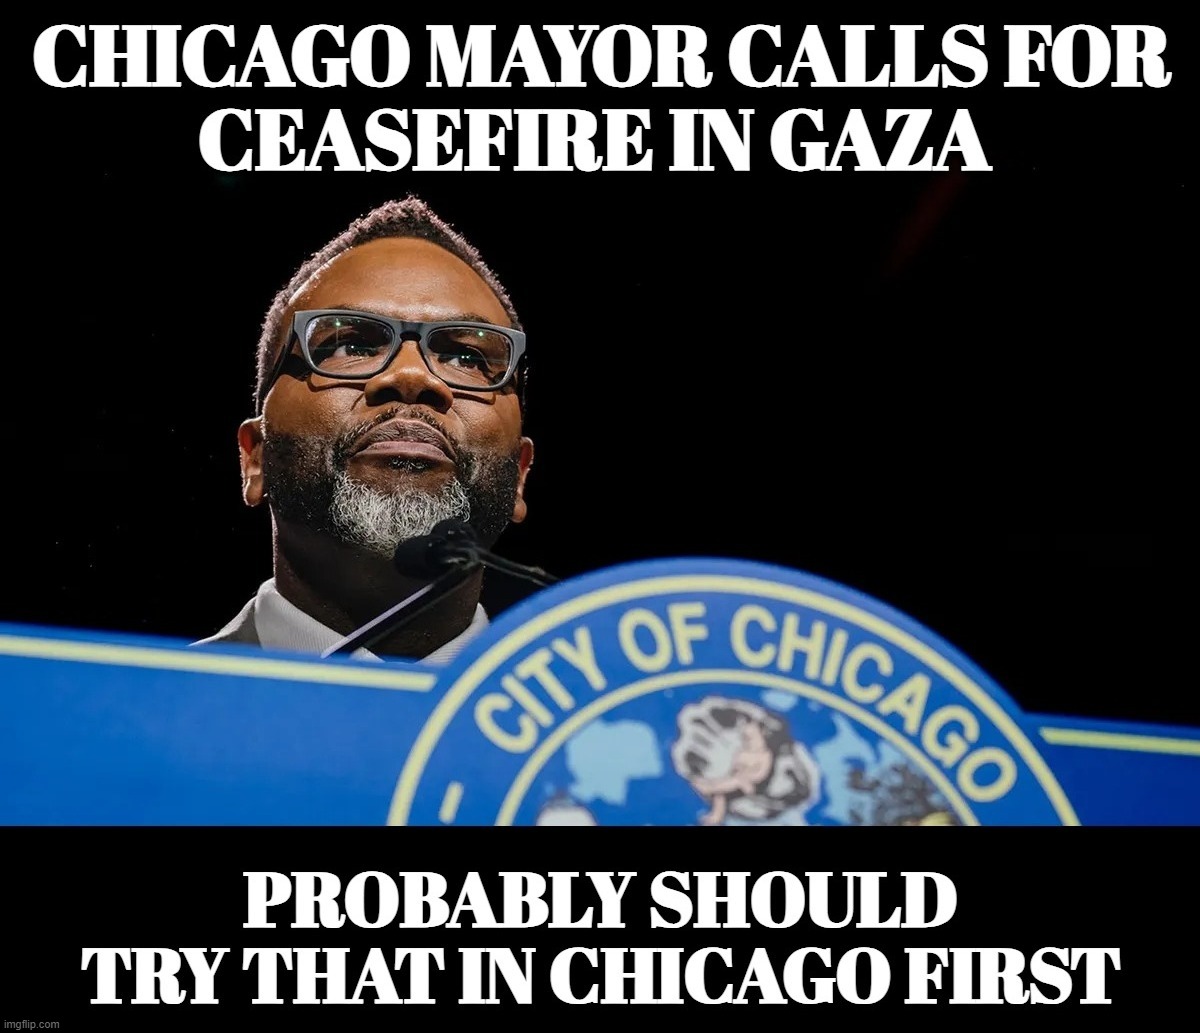 Murder City Mayor Calls the Kettle Black | image tagged in chicago,murder city,gaza,ceasefire,liberal hypocrisy,the pot calling the kettle black | made w/ Imgflip meme maker